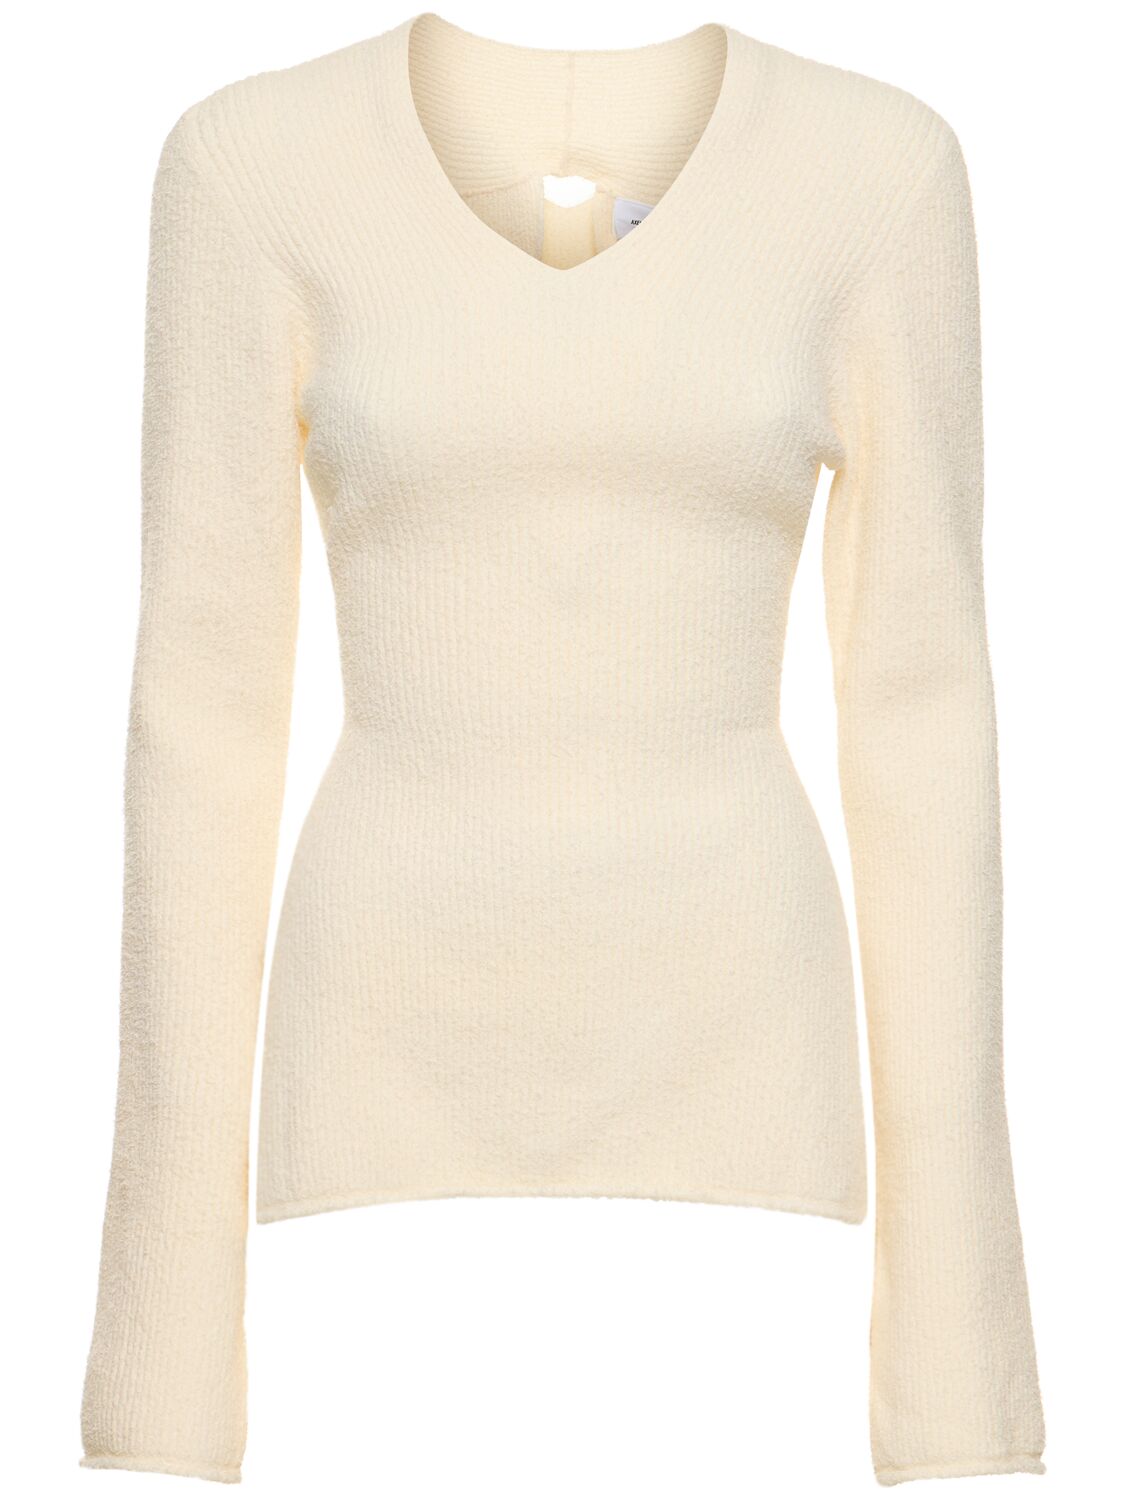 Image of Tube Knit Cotton Blend Top